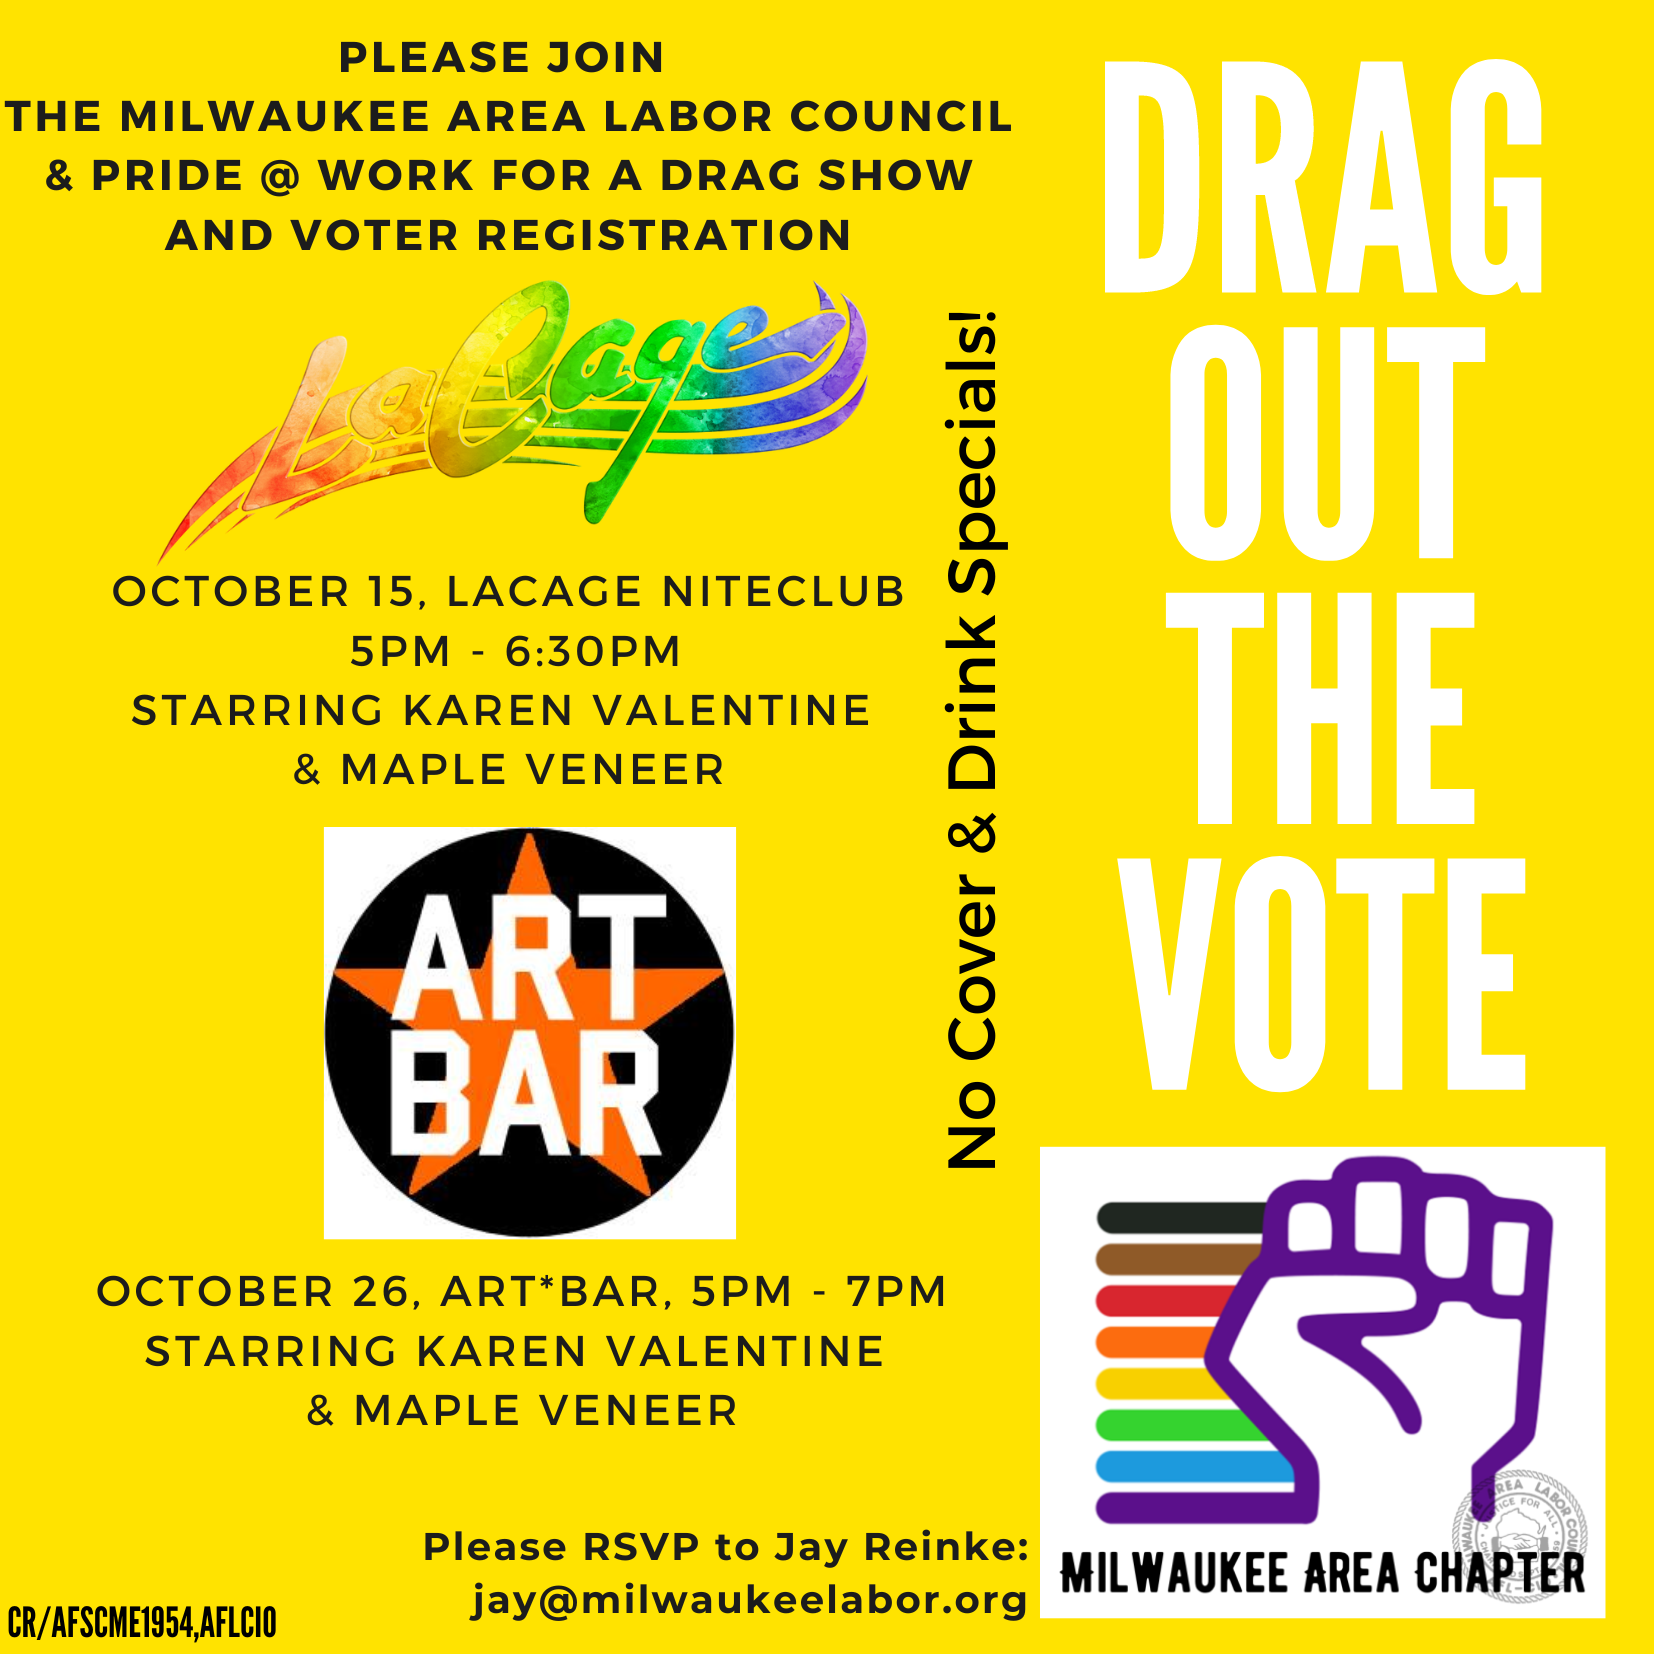 Drag Out The Vote!